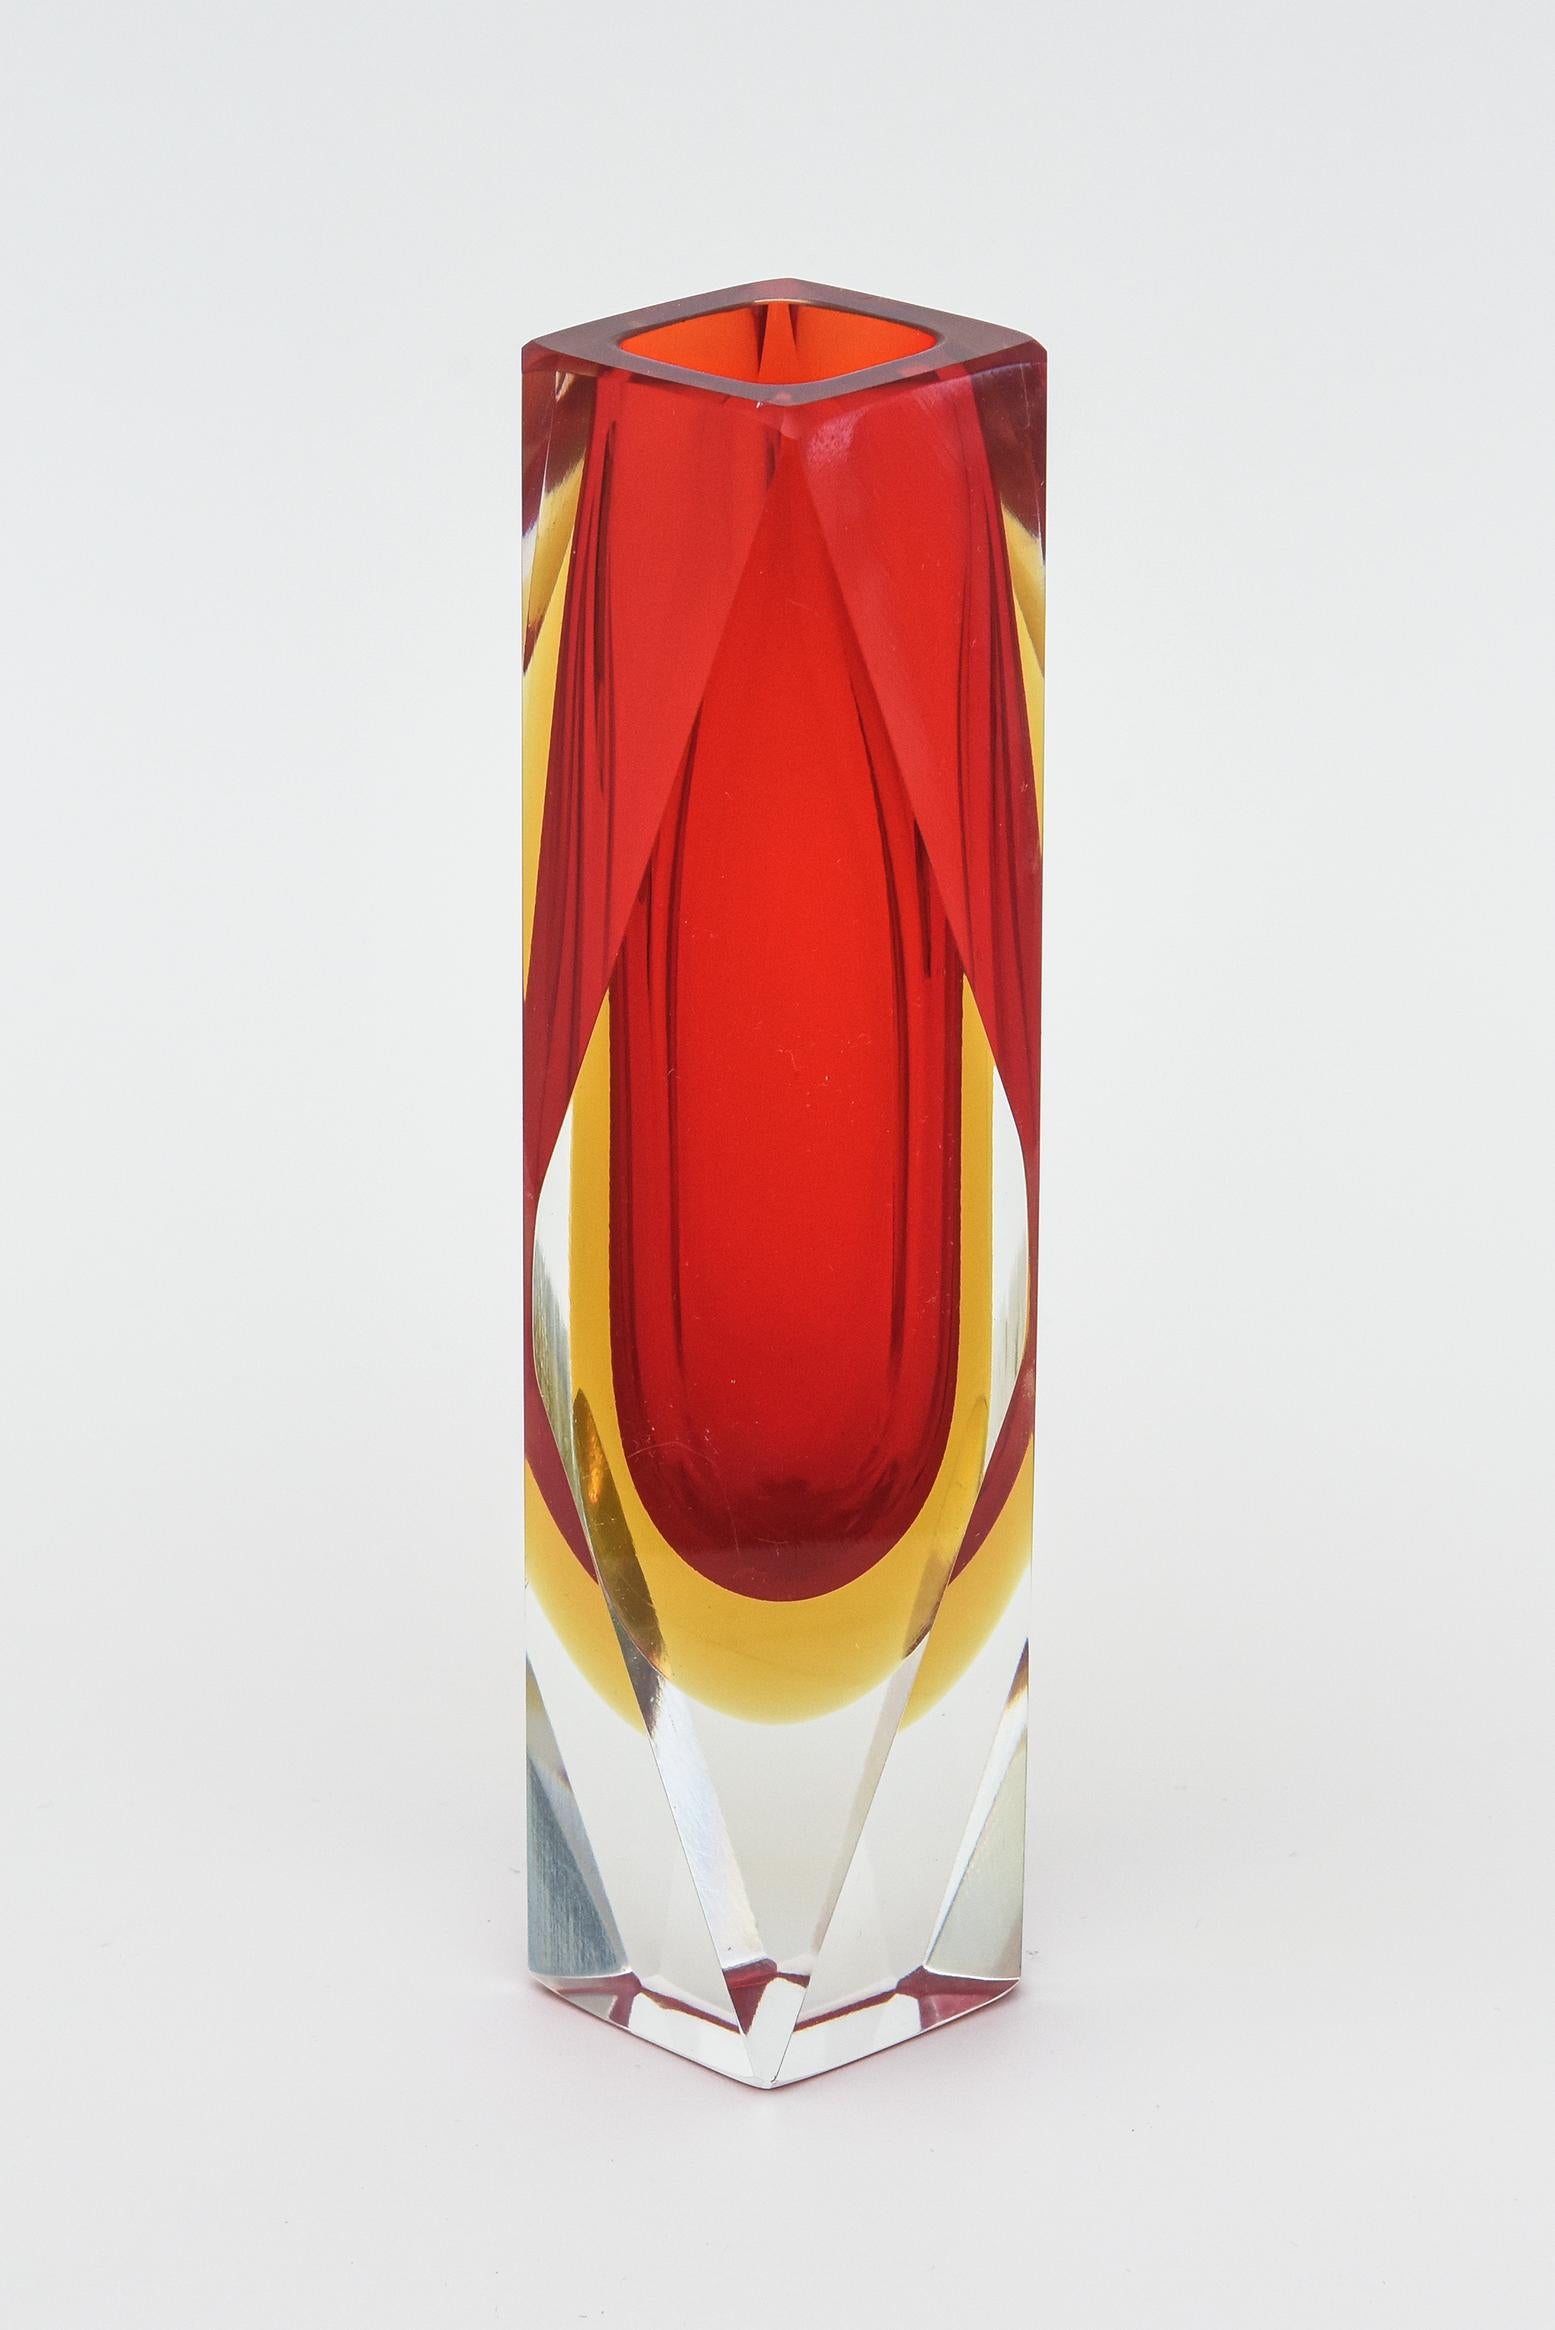 Mandruzzato Vintage Murano Red and Yellow Sommerso Faceted Glass Vase Italian For Sale 3